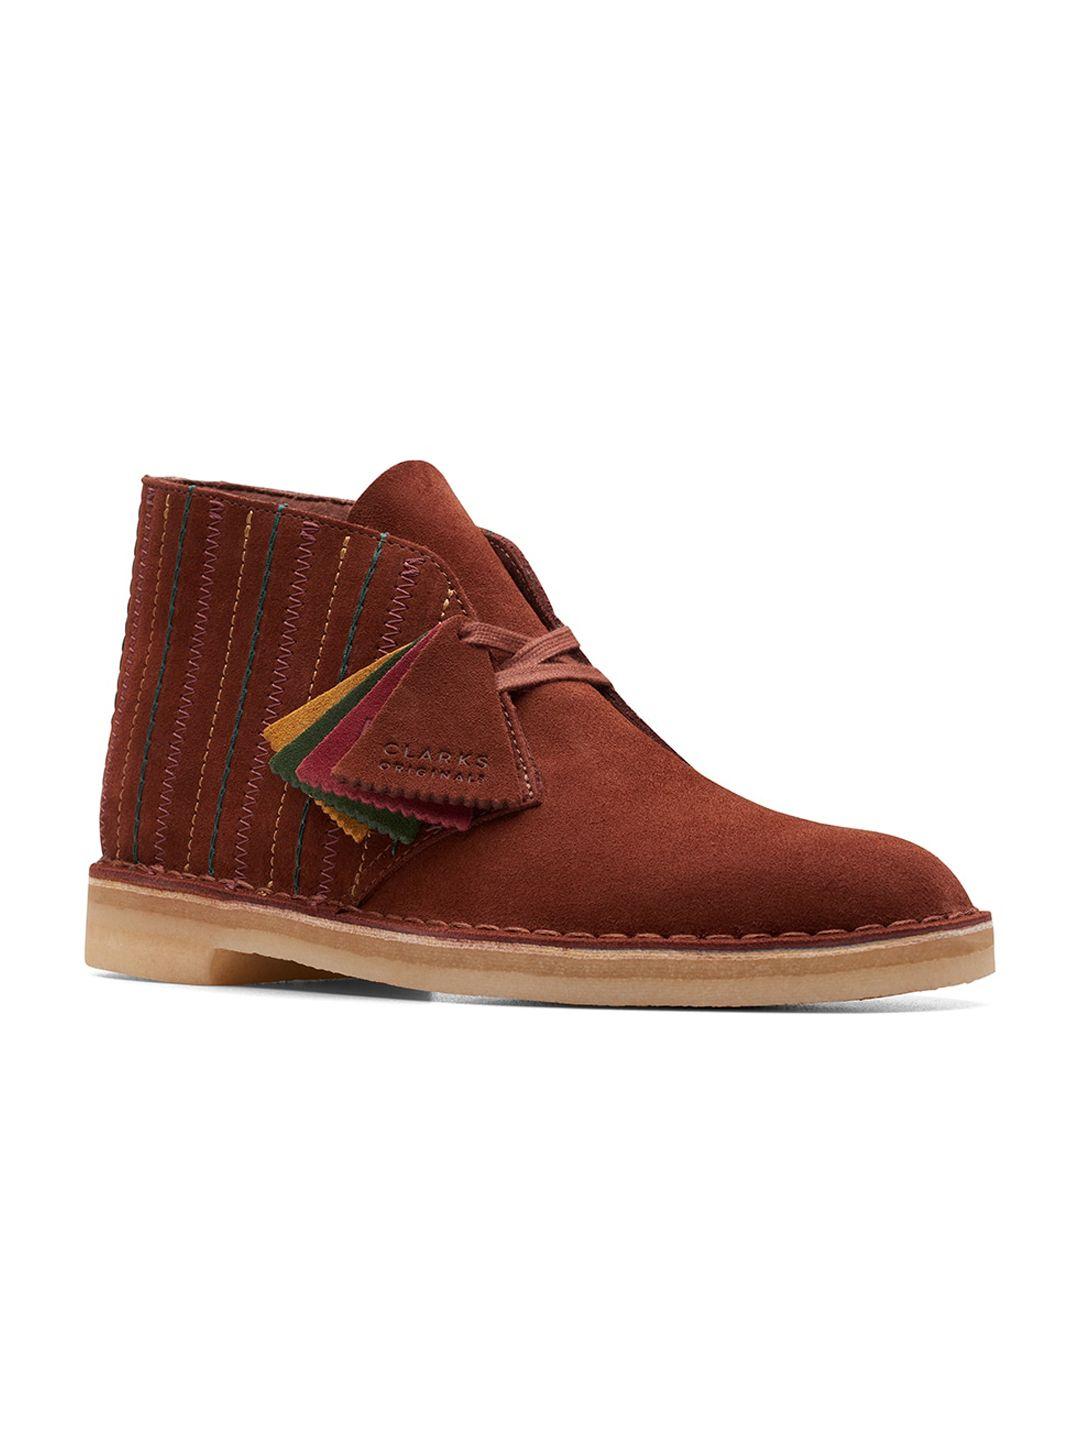 clarks men embroidered suede mid-top desert boots